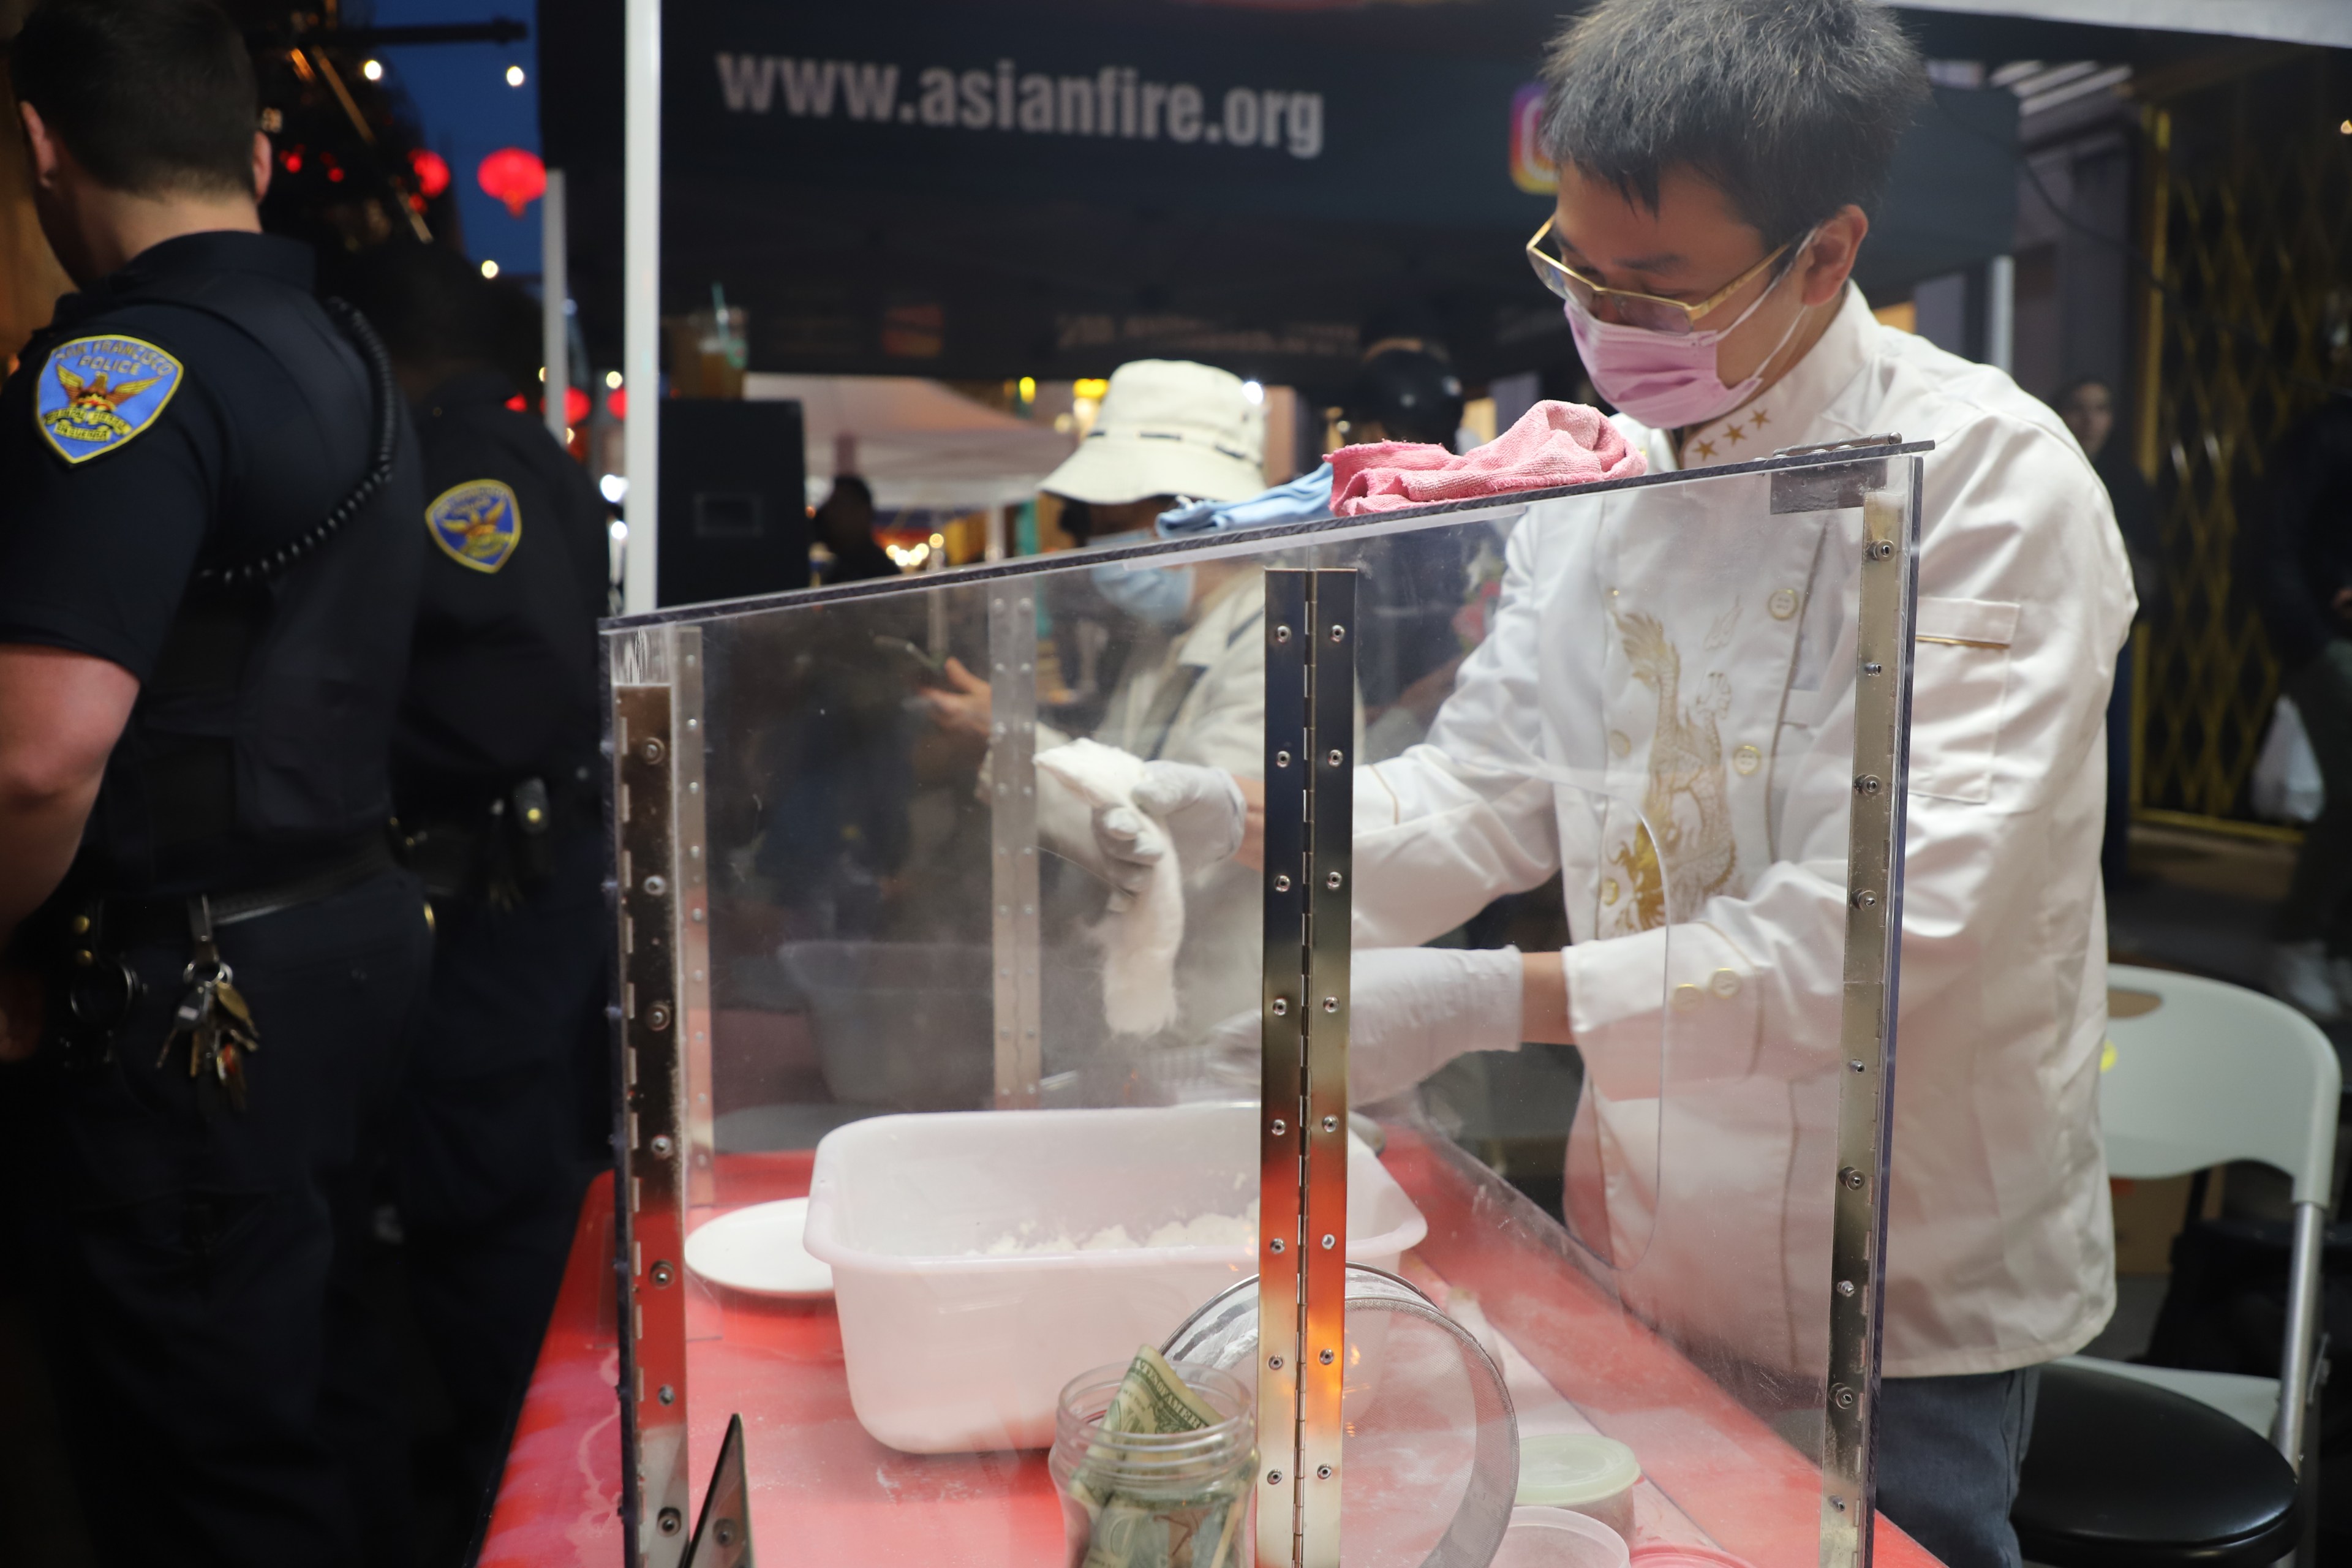 A person in a white chef's jacket and mask making food behind a clear barrier, watched by police officers.